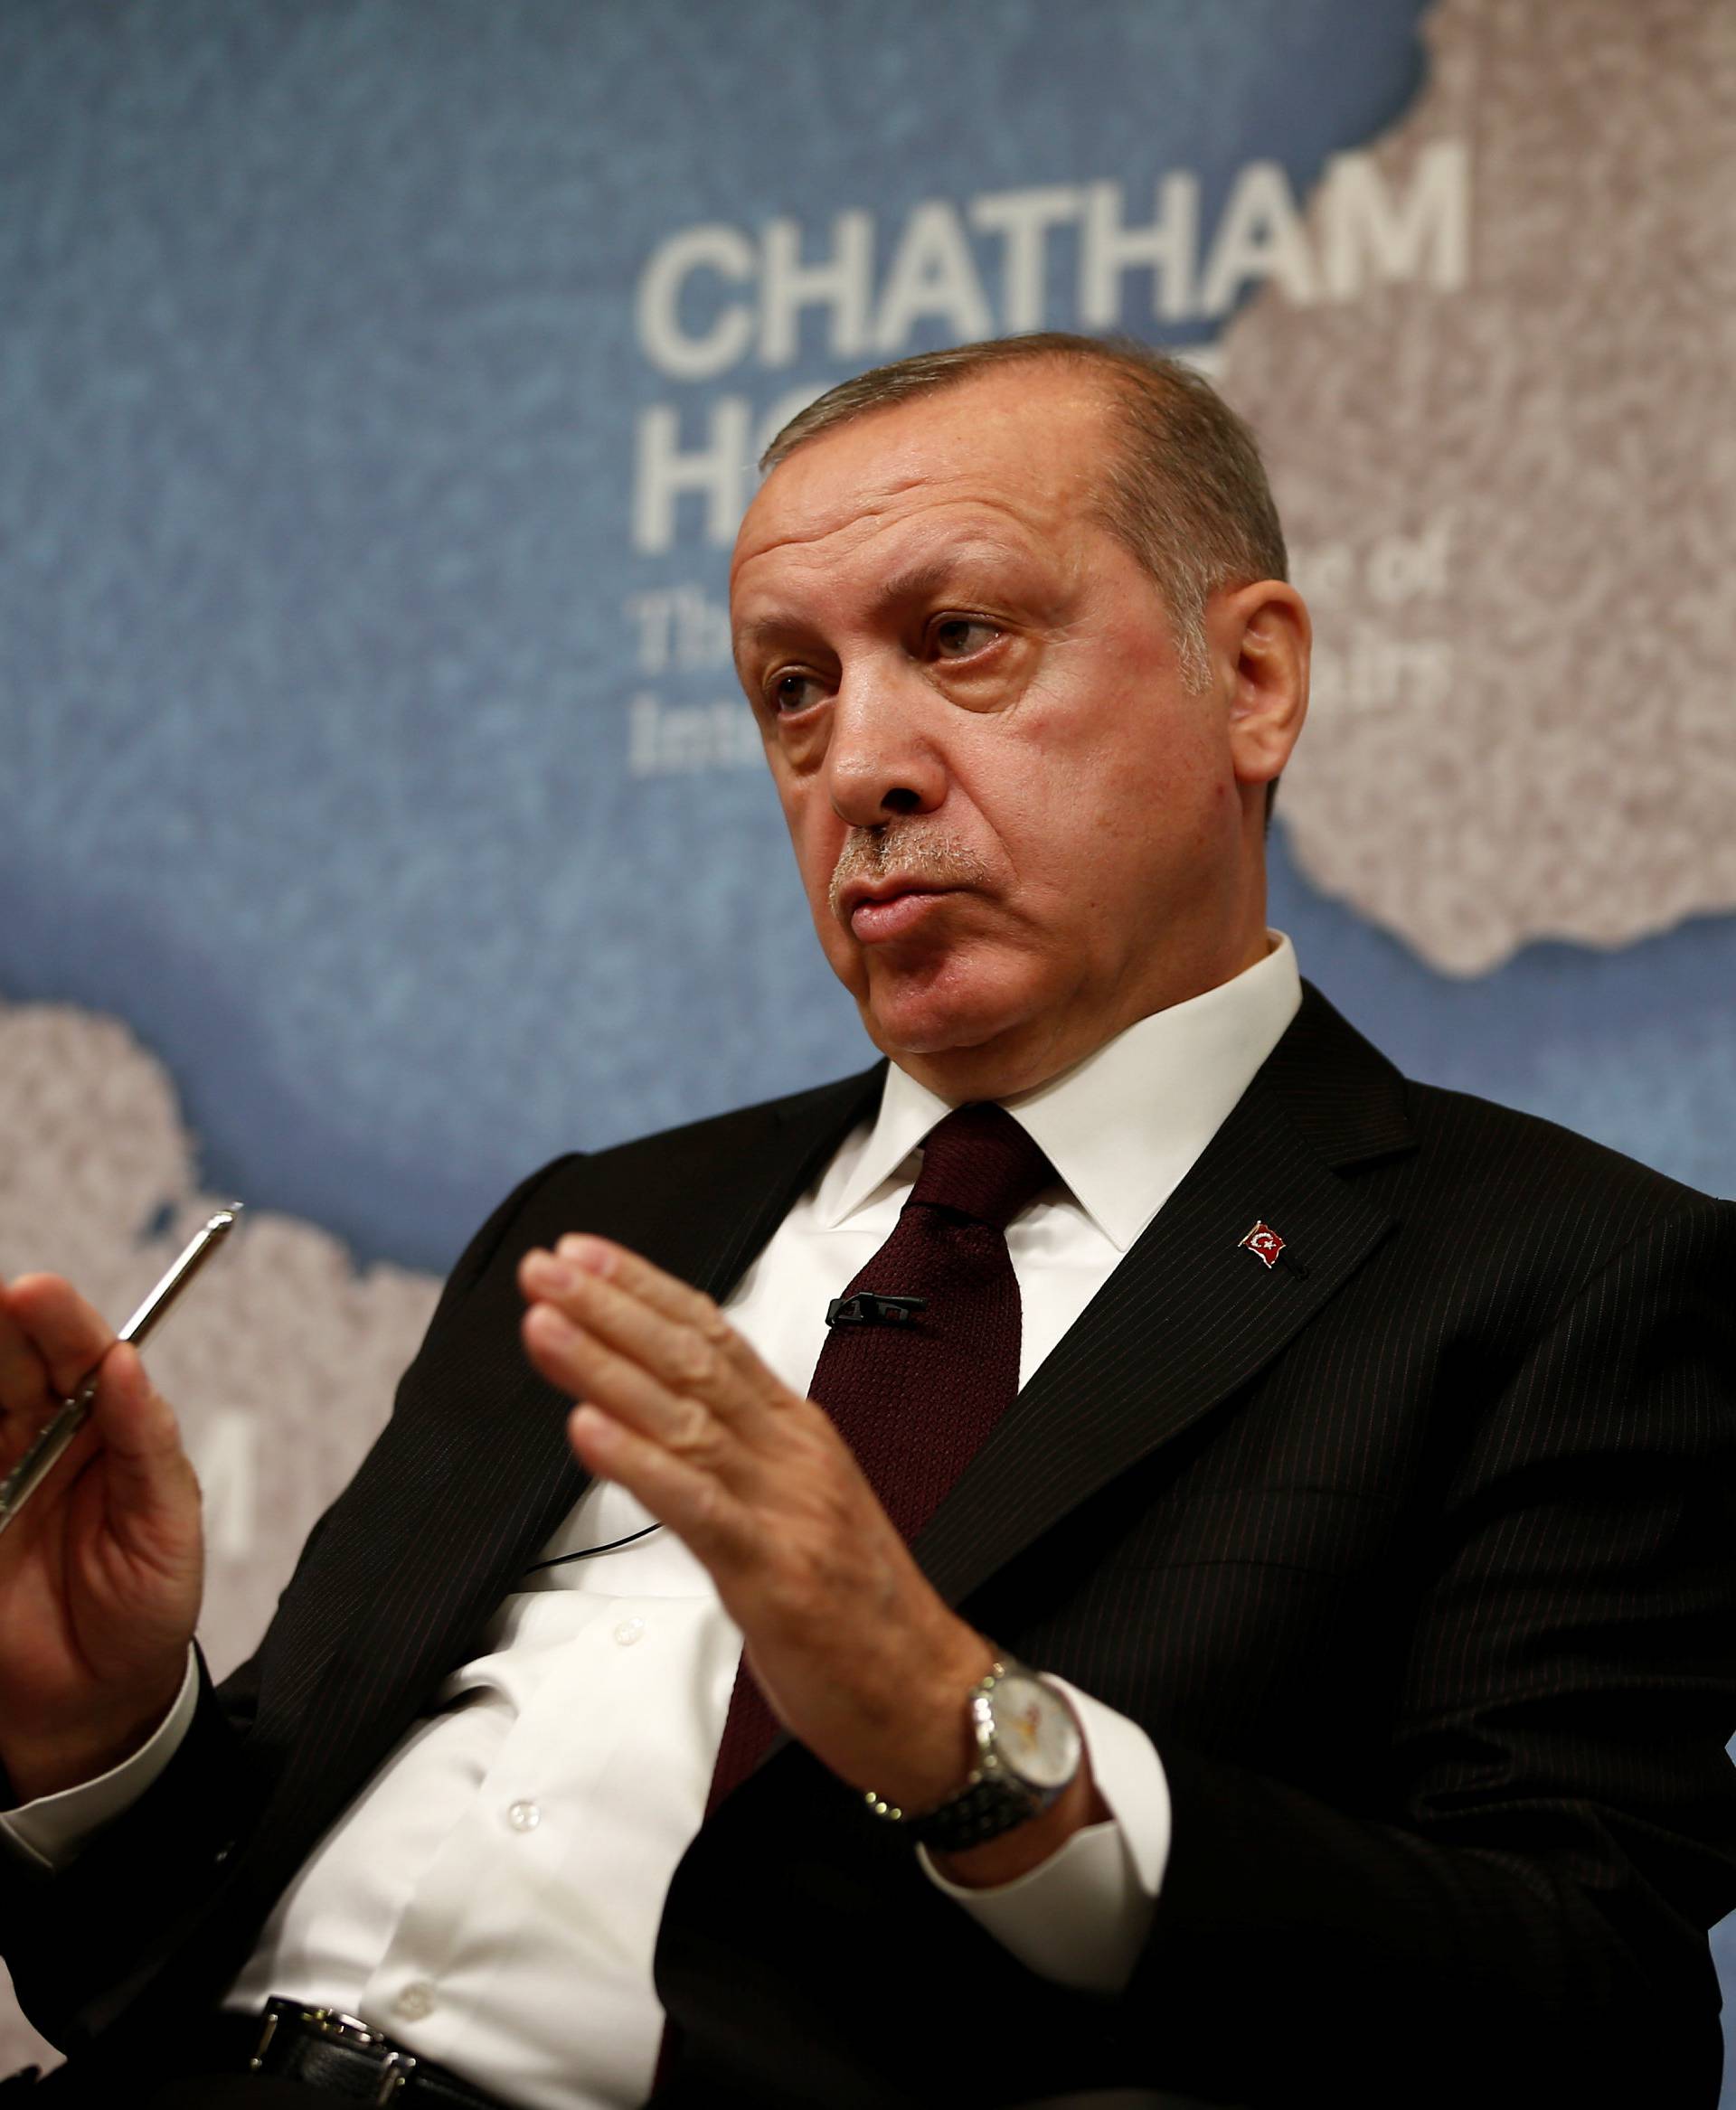 The President of Turkey, Recep Tayyip Erdogan, speaks at Chatham House in central London